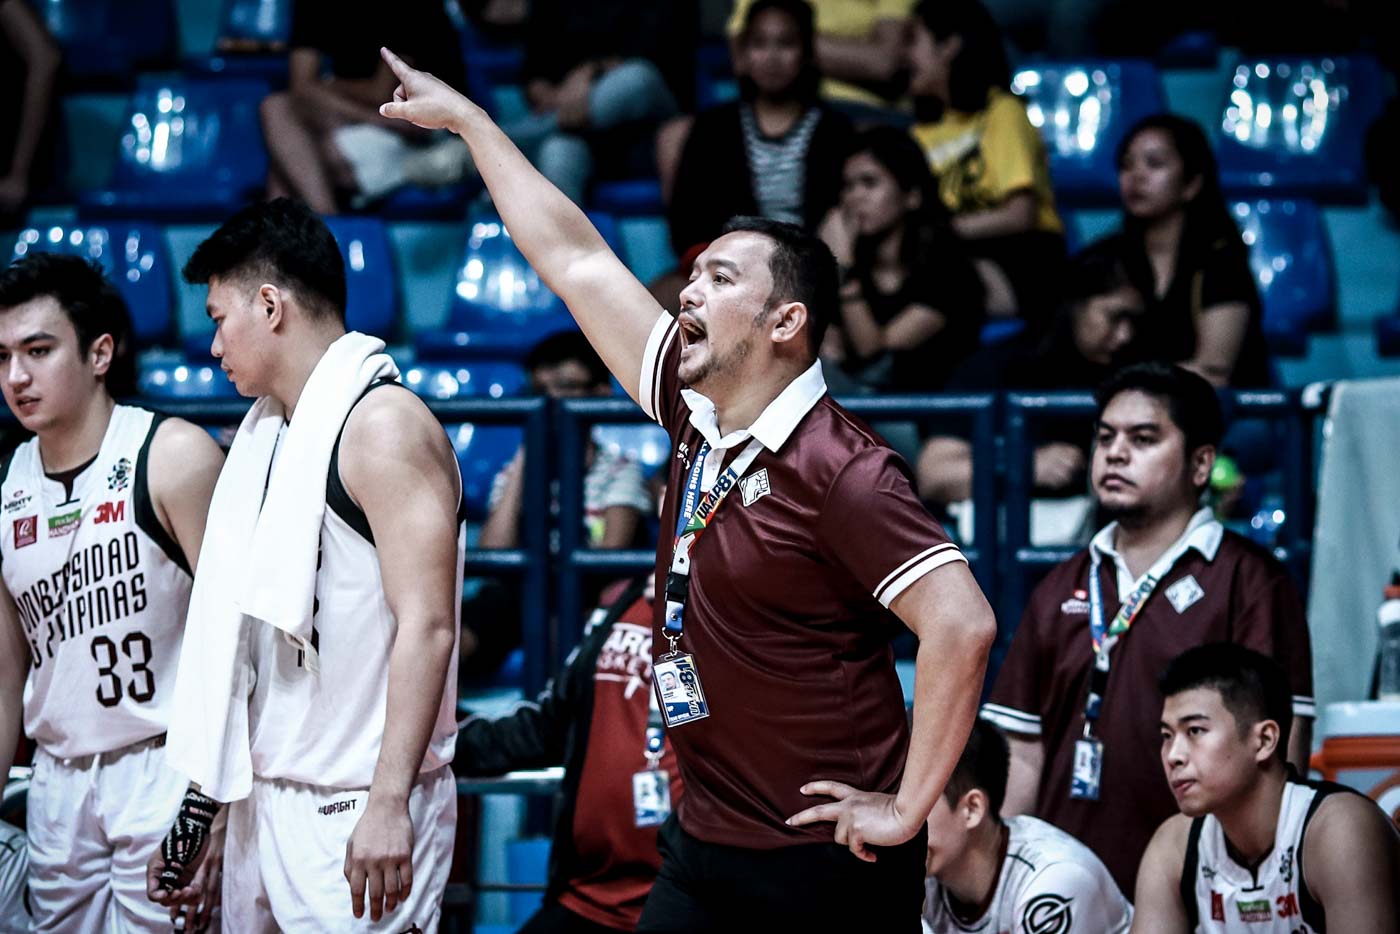 BREAKTHROUGH. Bo Perasol never gave up and finally fulfilled his Final Four dream. Photo by Michael Gatpandan/Rappler  